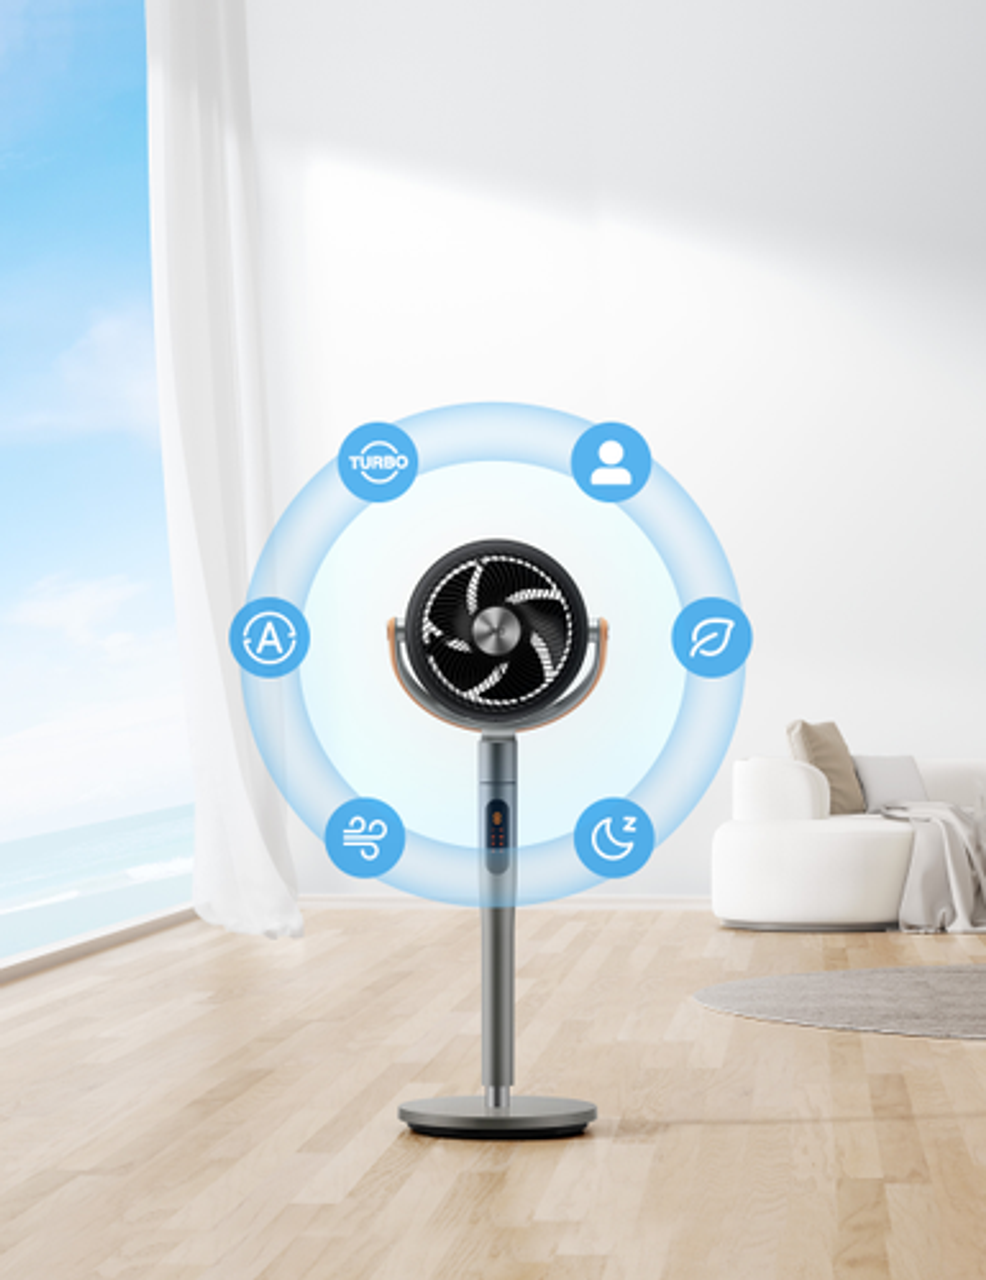 Dreo - Pedestal Fan with Remote, 120° + 105°Smart Oscillating Floor Fans with Wi-Fi/Voice Control, Works with Alexa/Google - Gray